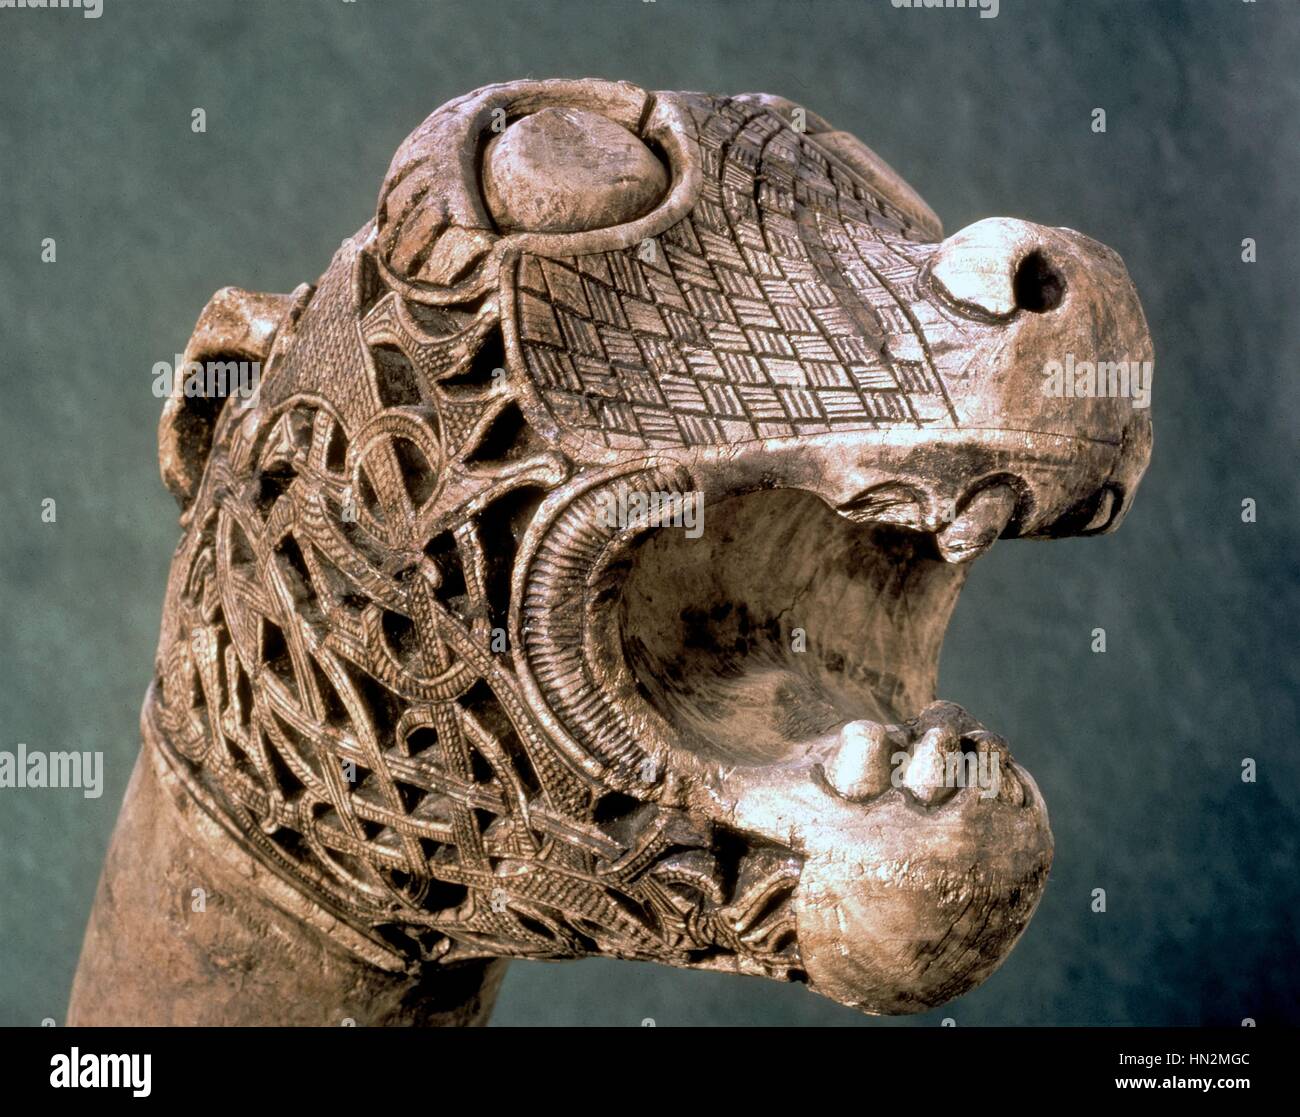 Pole with carved animal head found in the funerary treasure of Oseberg Viking art  Pole dated back 815-820 and discovered in 1905. Norway, University of Oslo Stock Photo